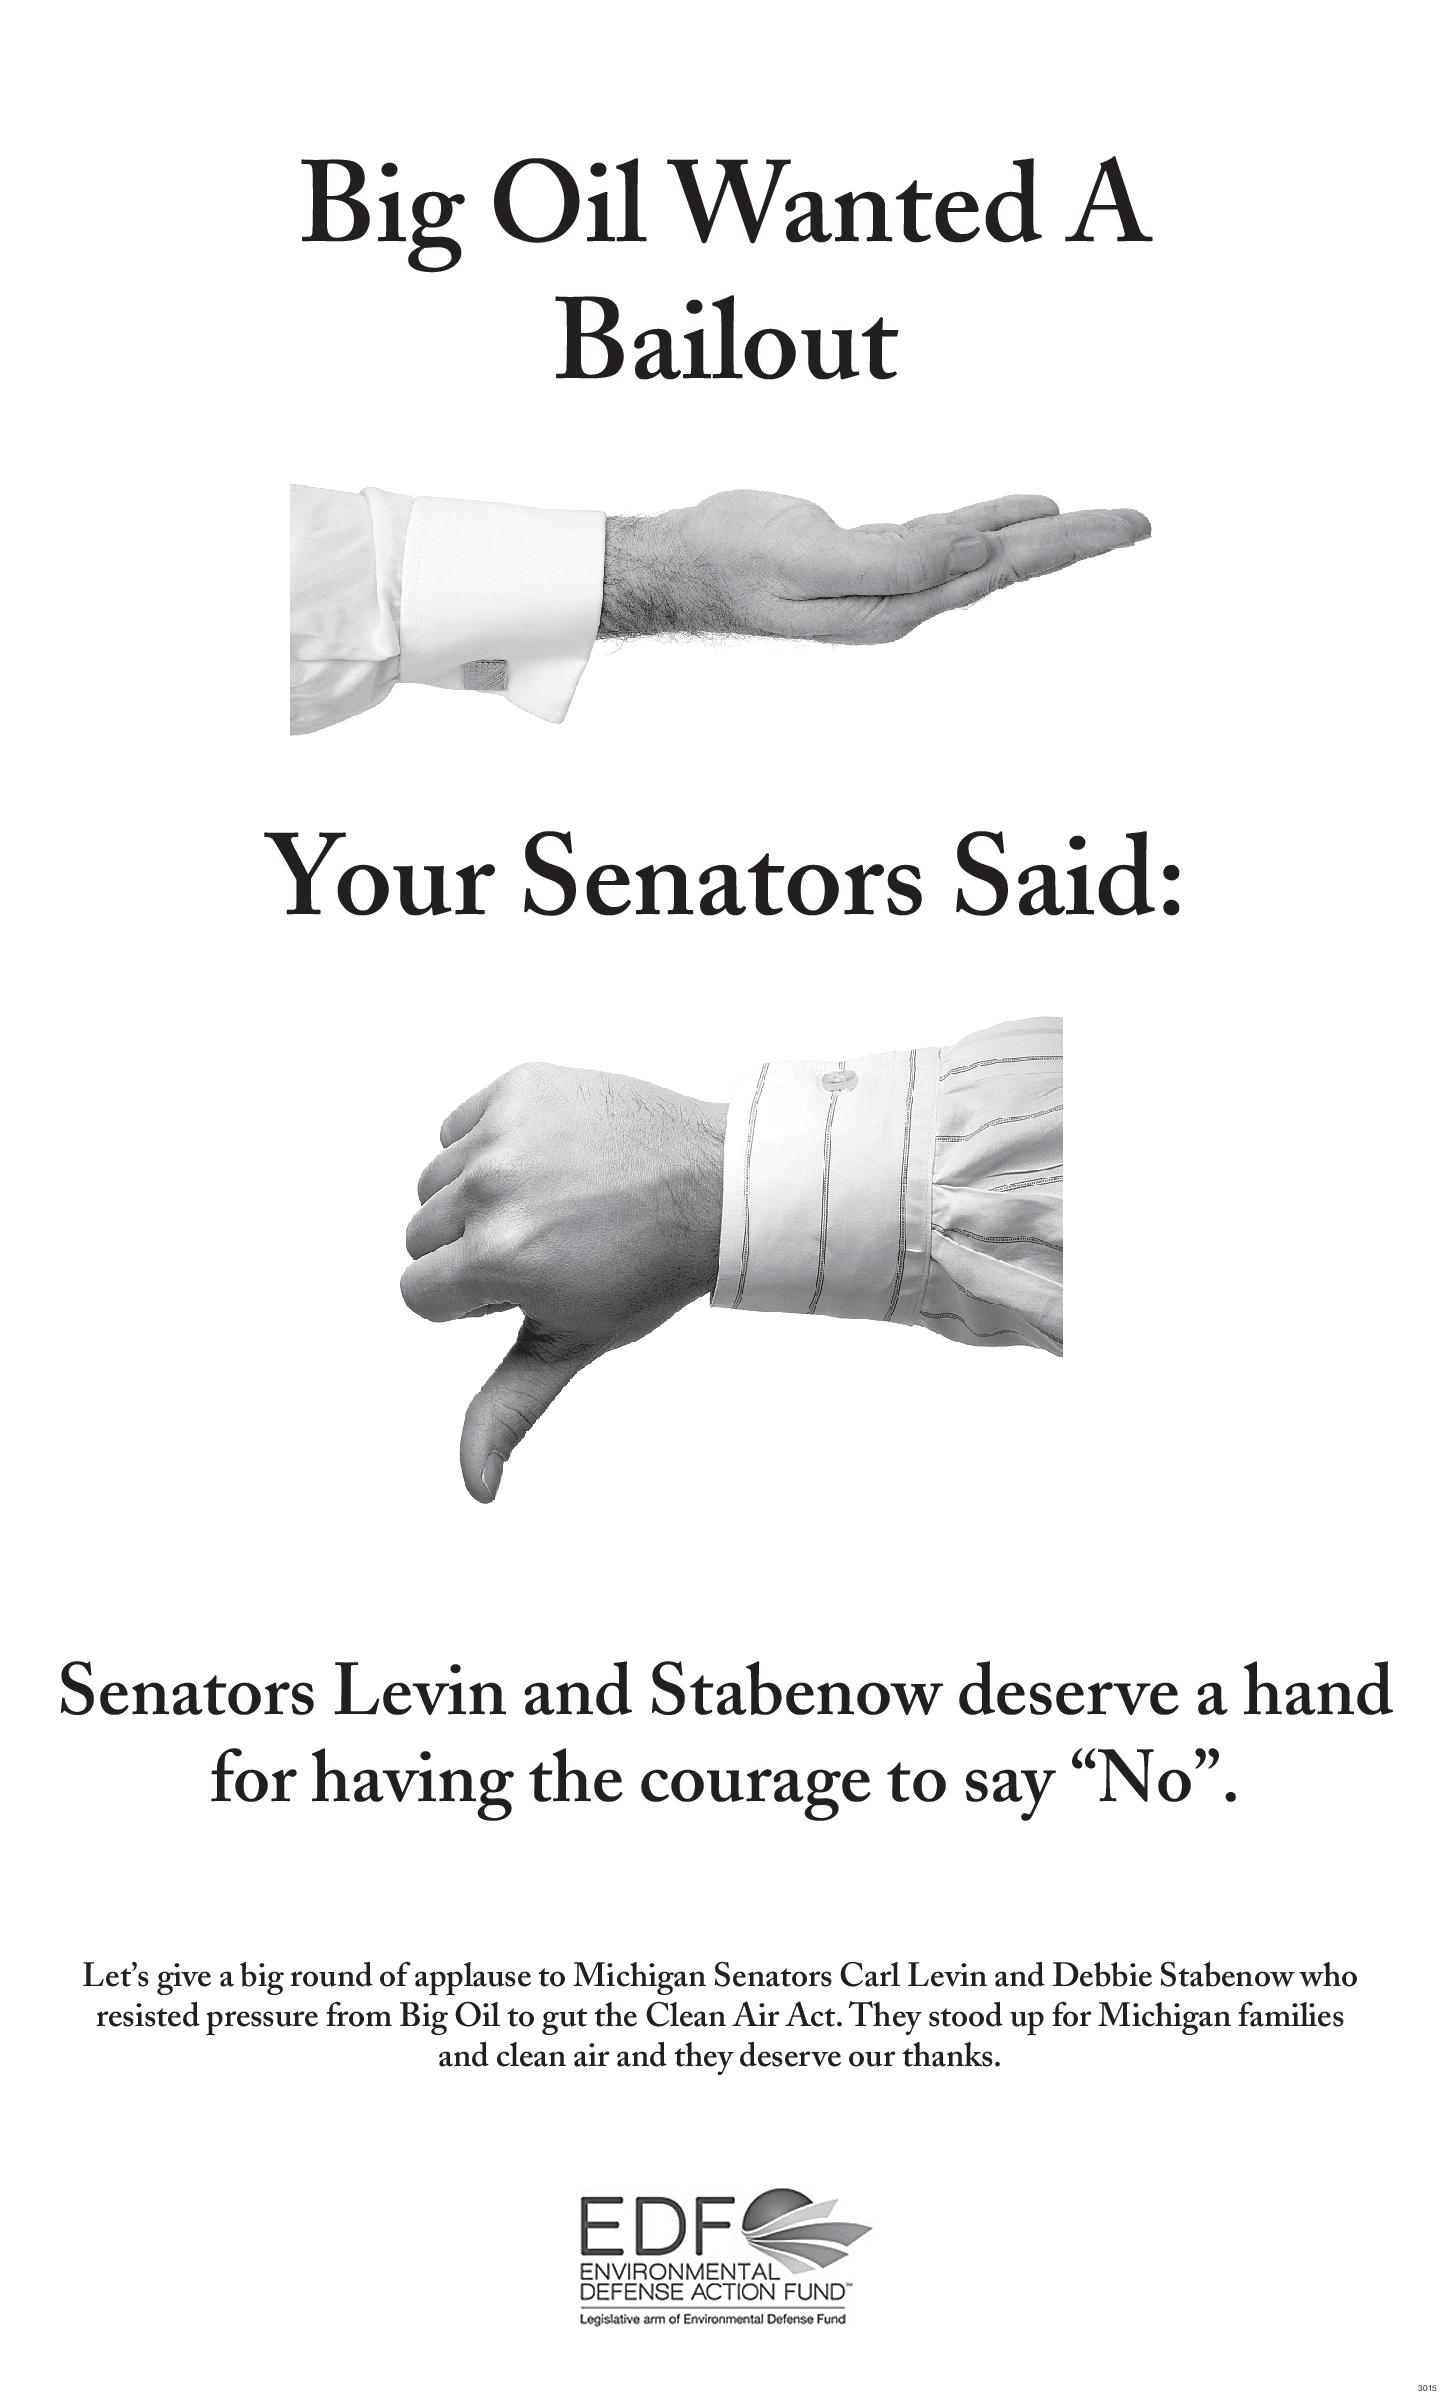 Thank You for Saying "No" to Big Oil: Senators Levin and Stabenow